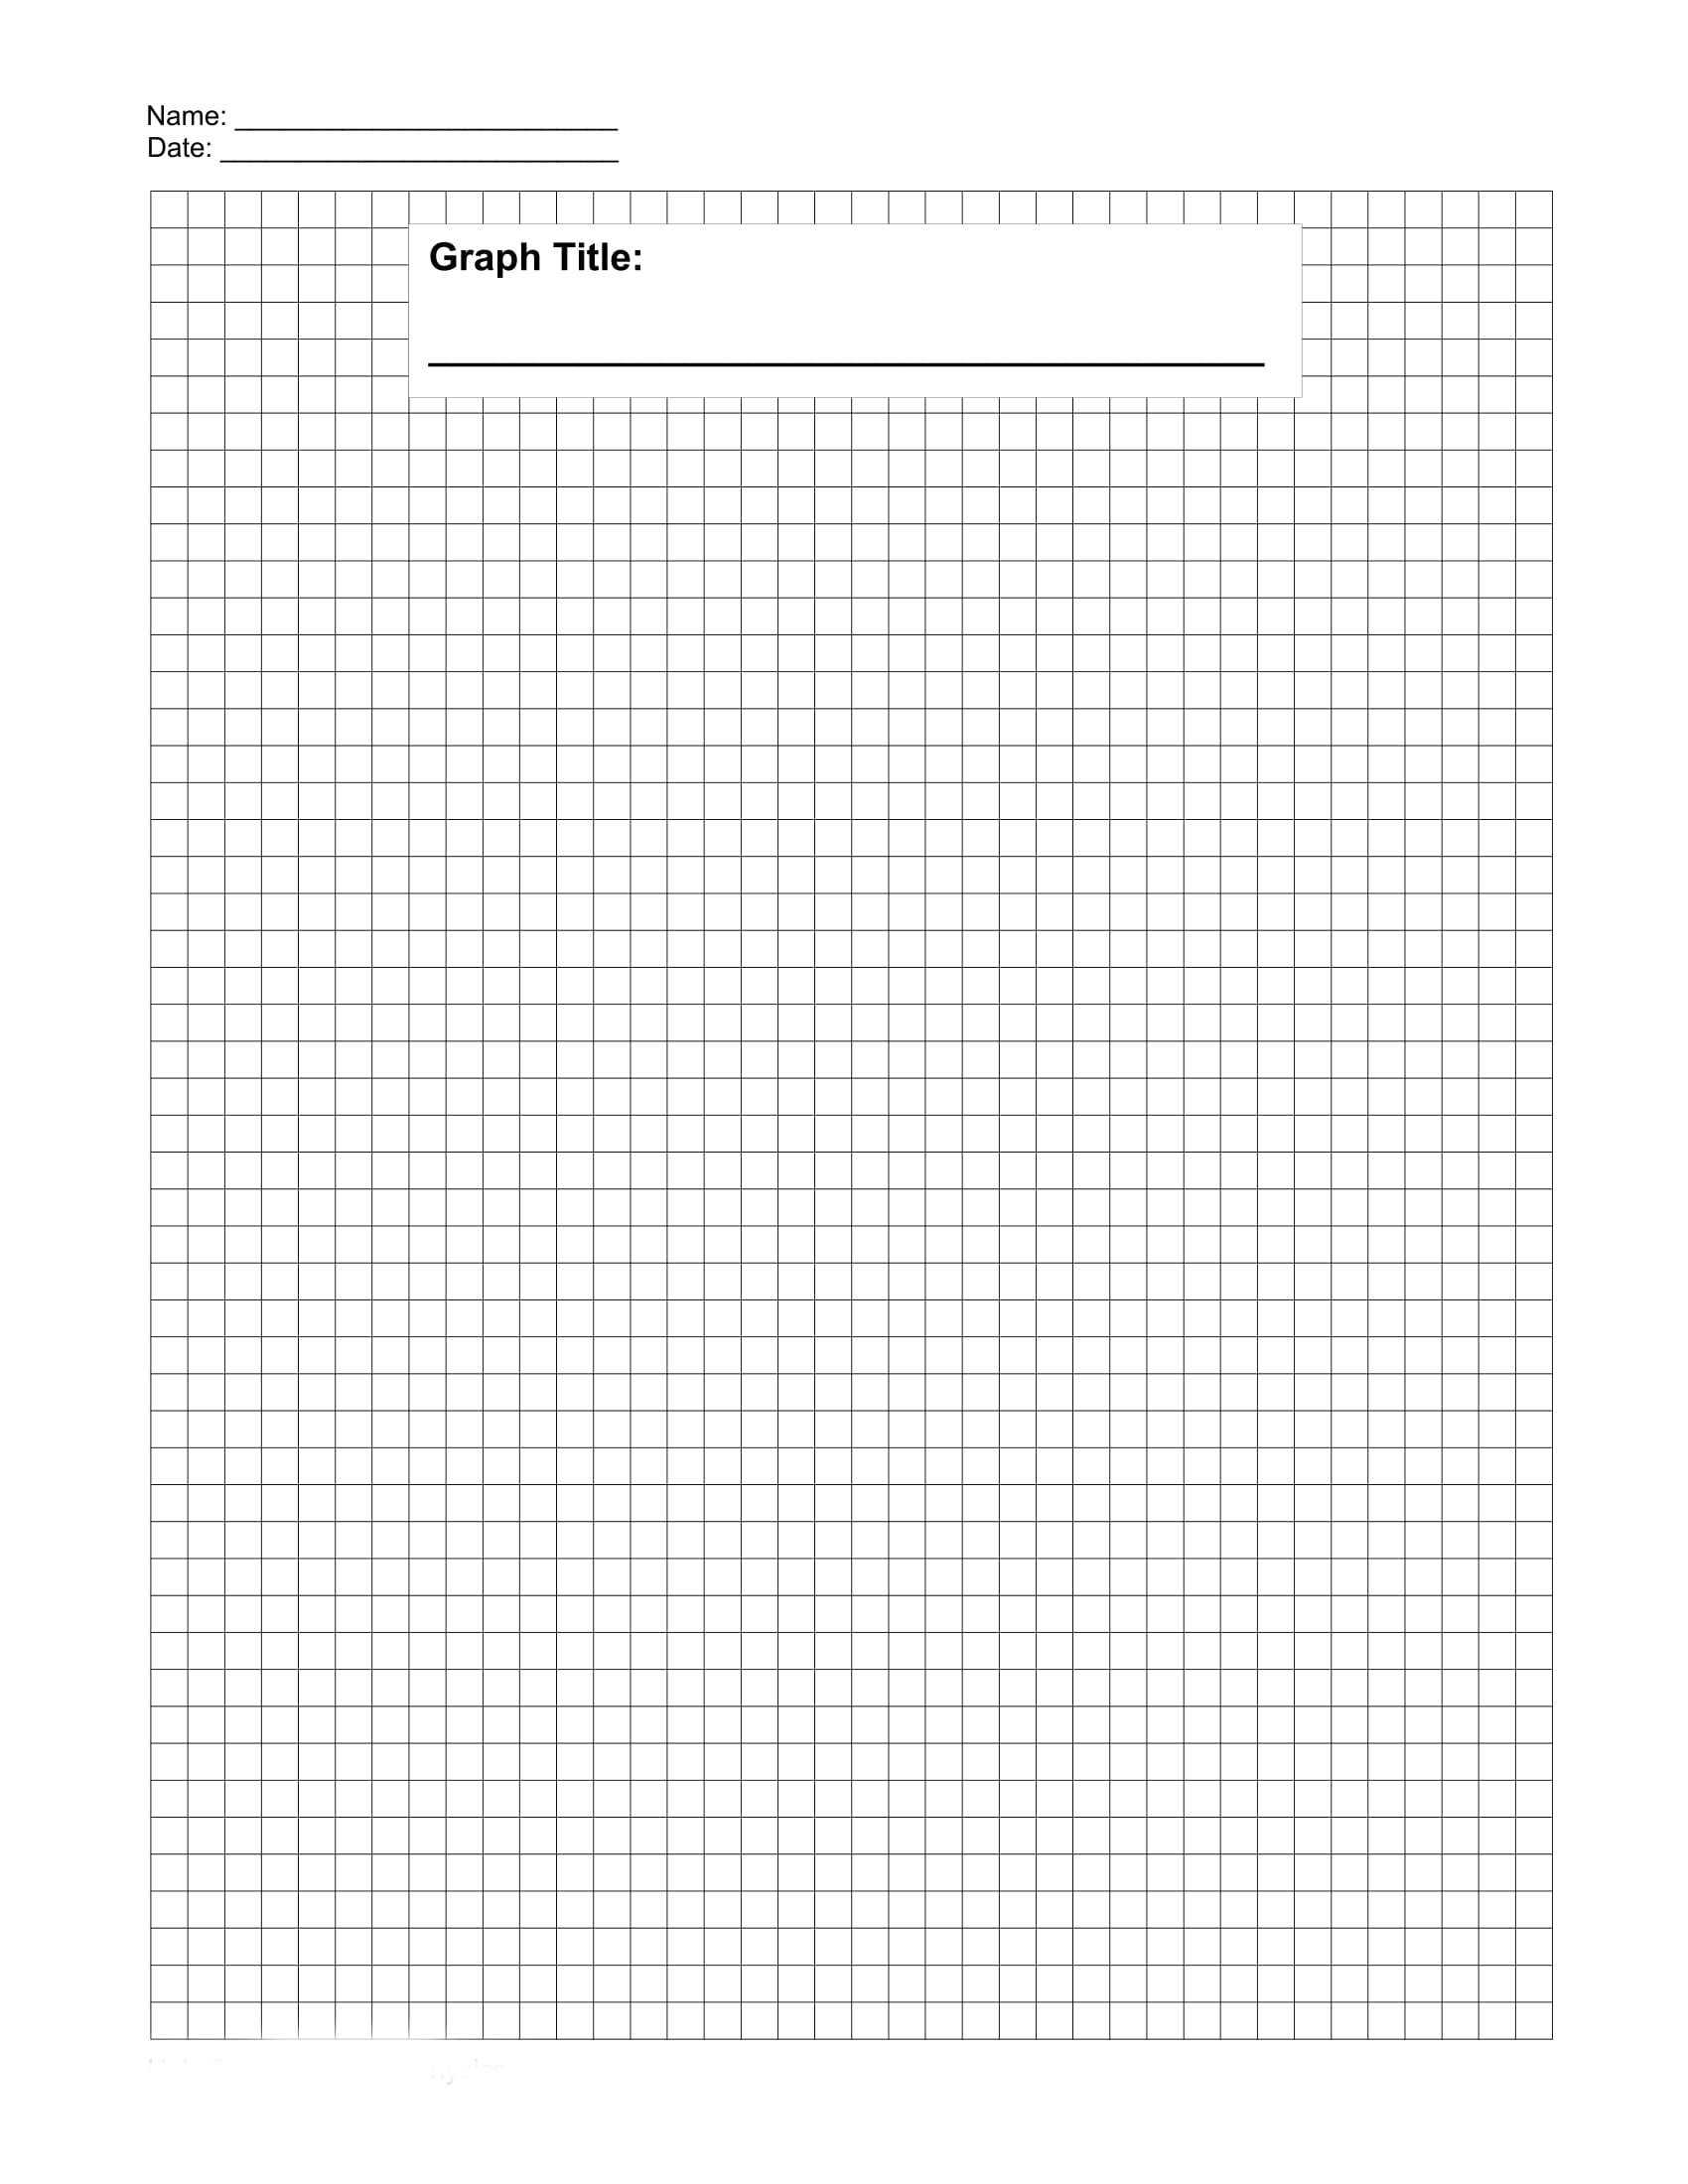 30+ Free Printable Graph Paper Templates (Word, Pdf) ᐅ Within Scientific Paper Template Word 2010